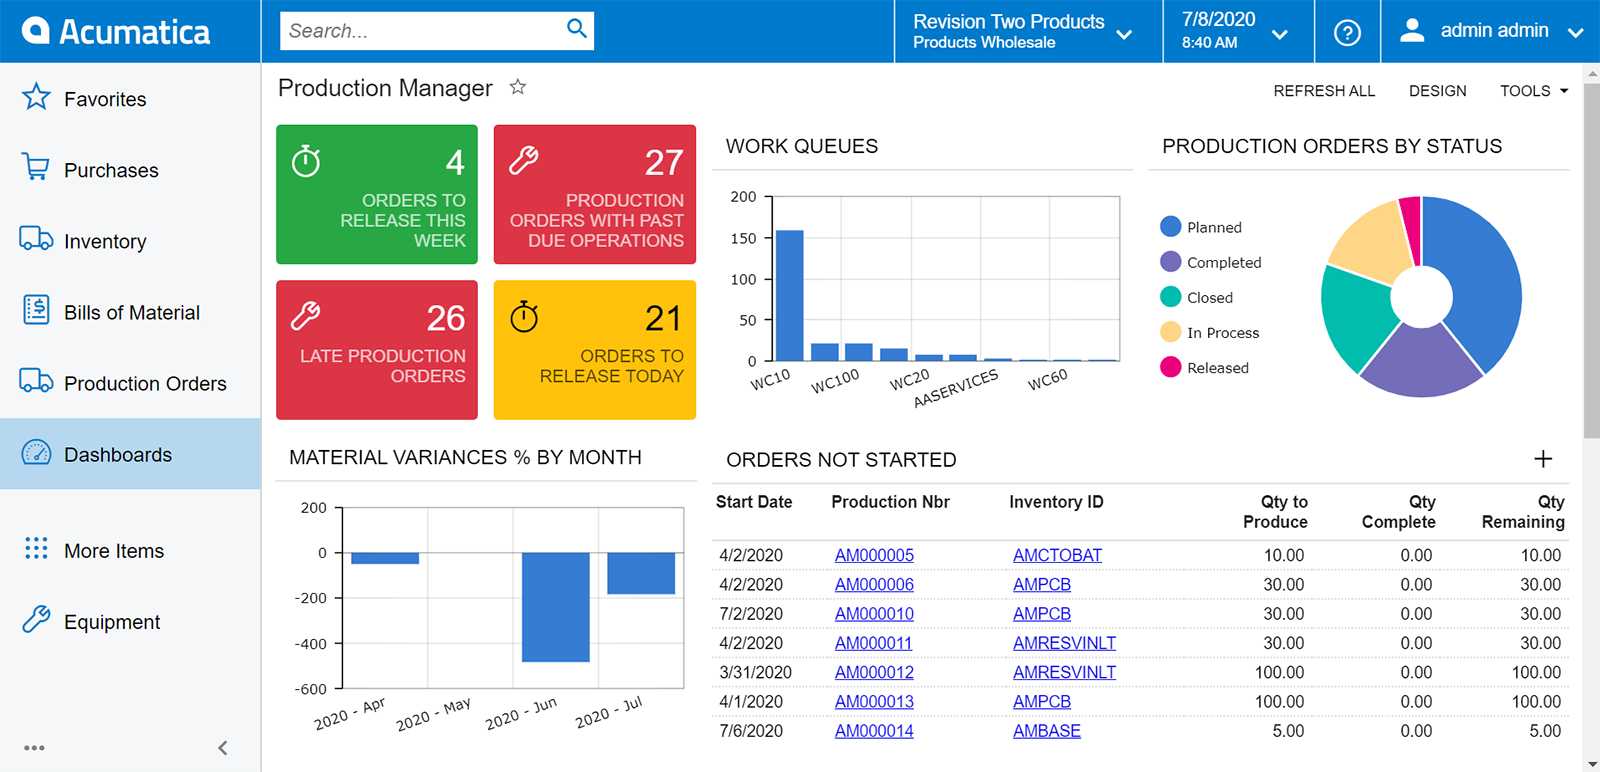 Acumatica Cloud ERP Software - Production Manager Dashboard